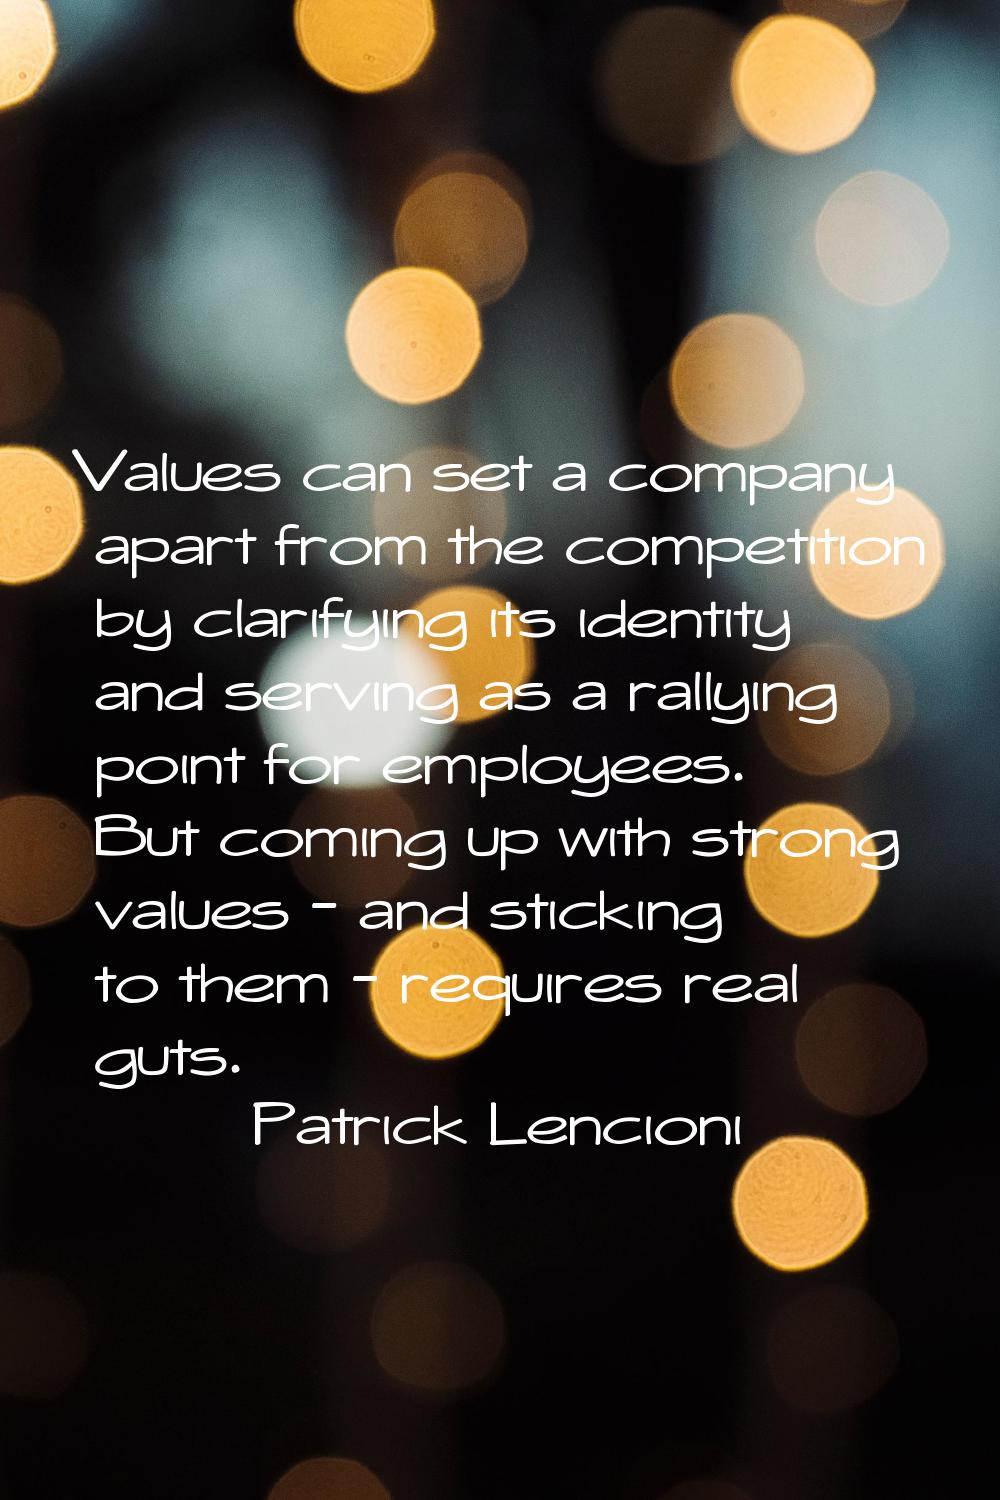 Values can set a company apart from the competition by clarifying its identity and serving as a ral